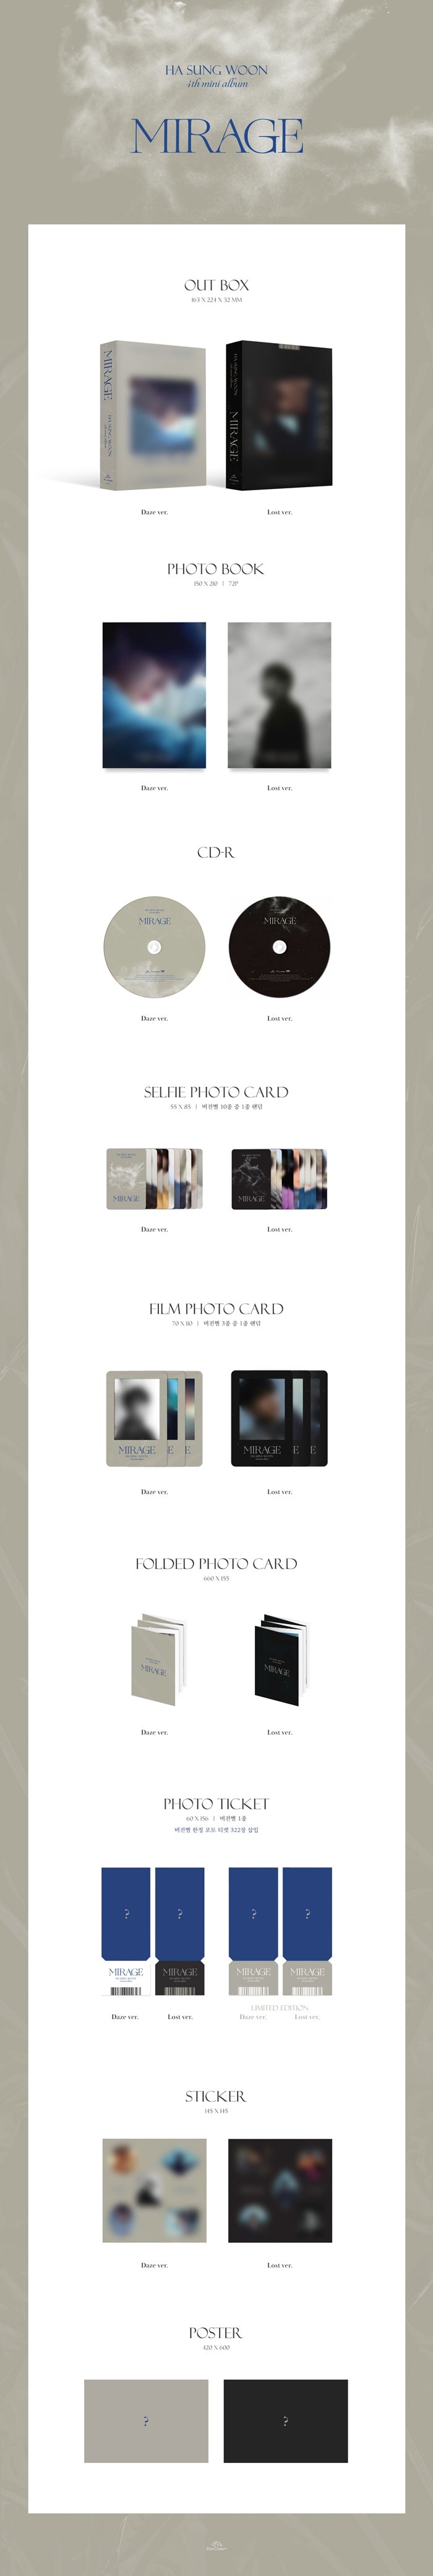 1 CD
1 Photo Book (72 pages)
1 Sleife Photo Card
1 Film Photo Card
1 Folded Photo Card
1 Sticker